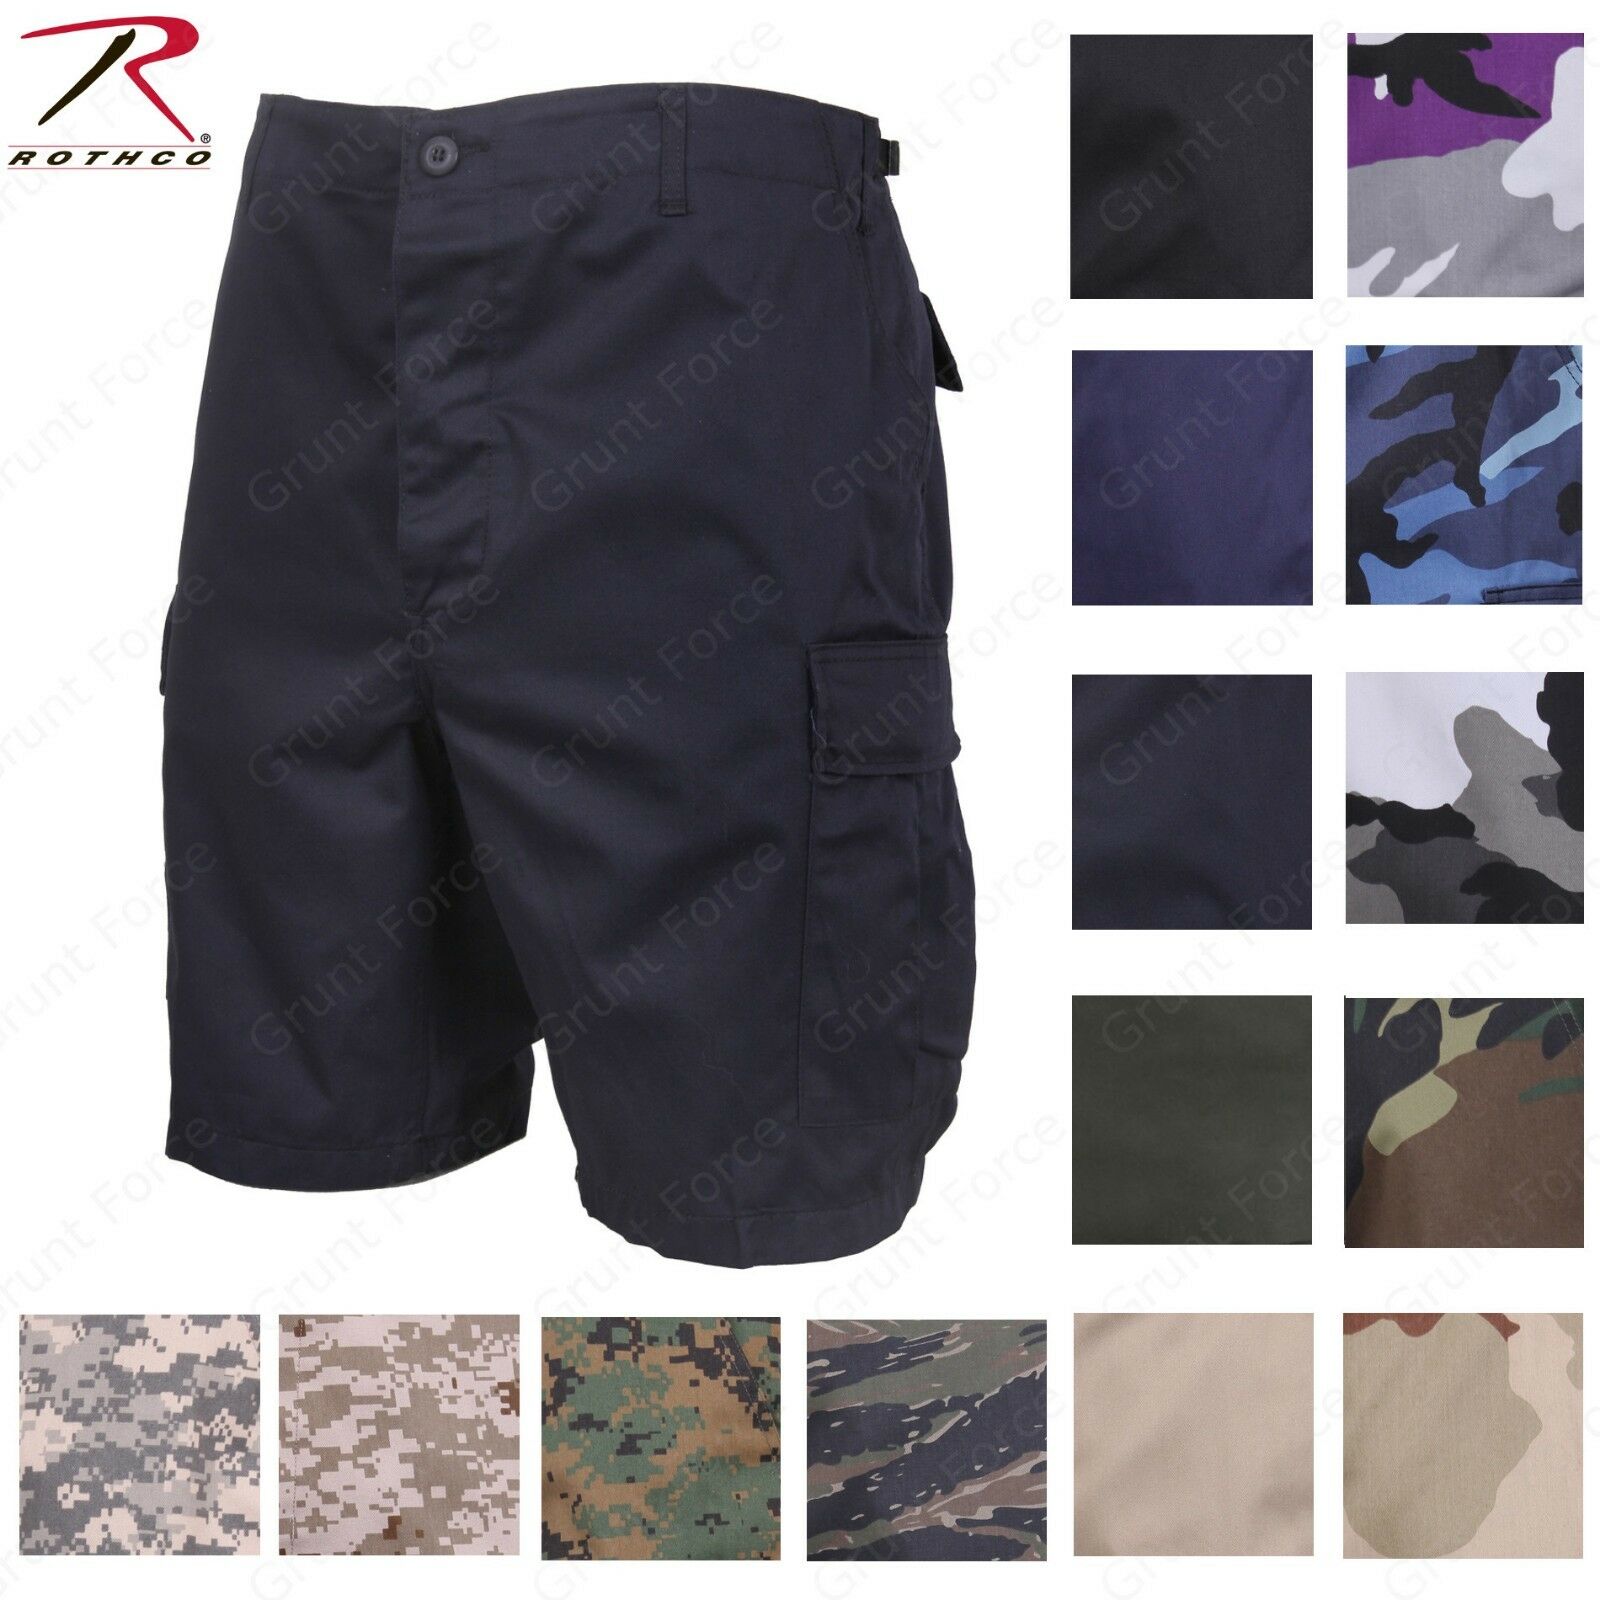 Combat Bdu Cargo Shorts Camouflage Camo Military Army